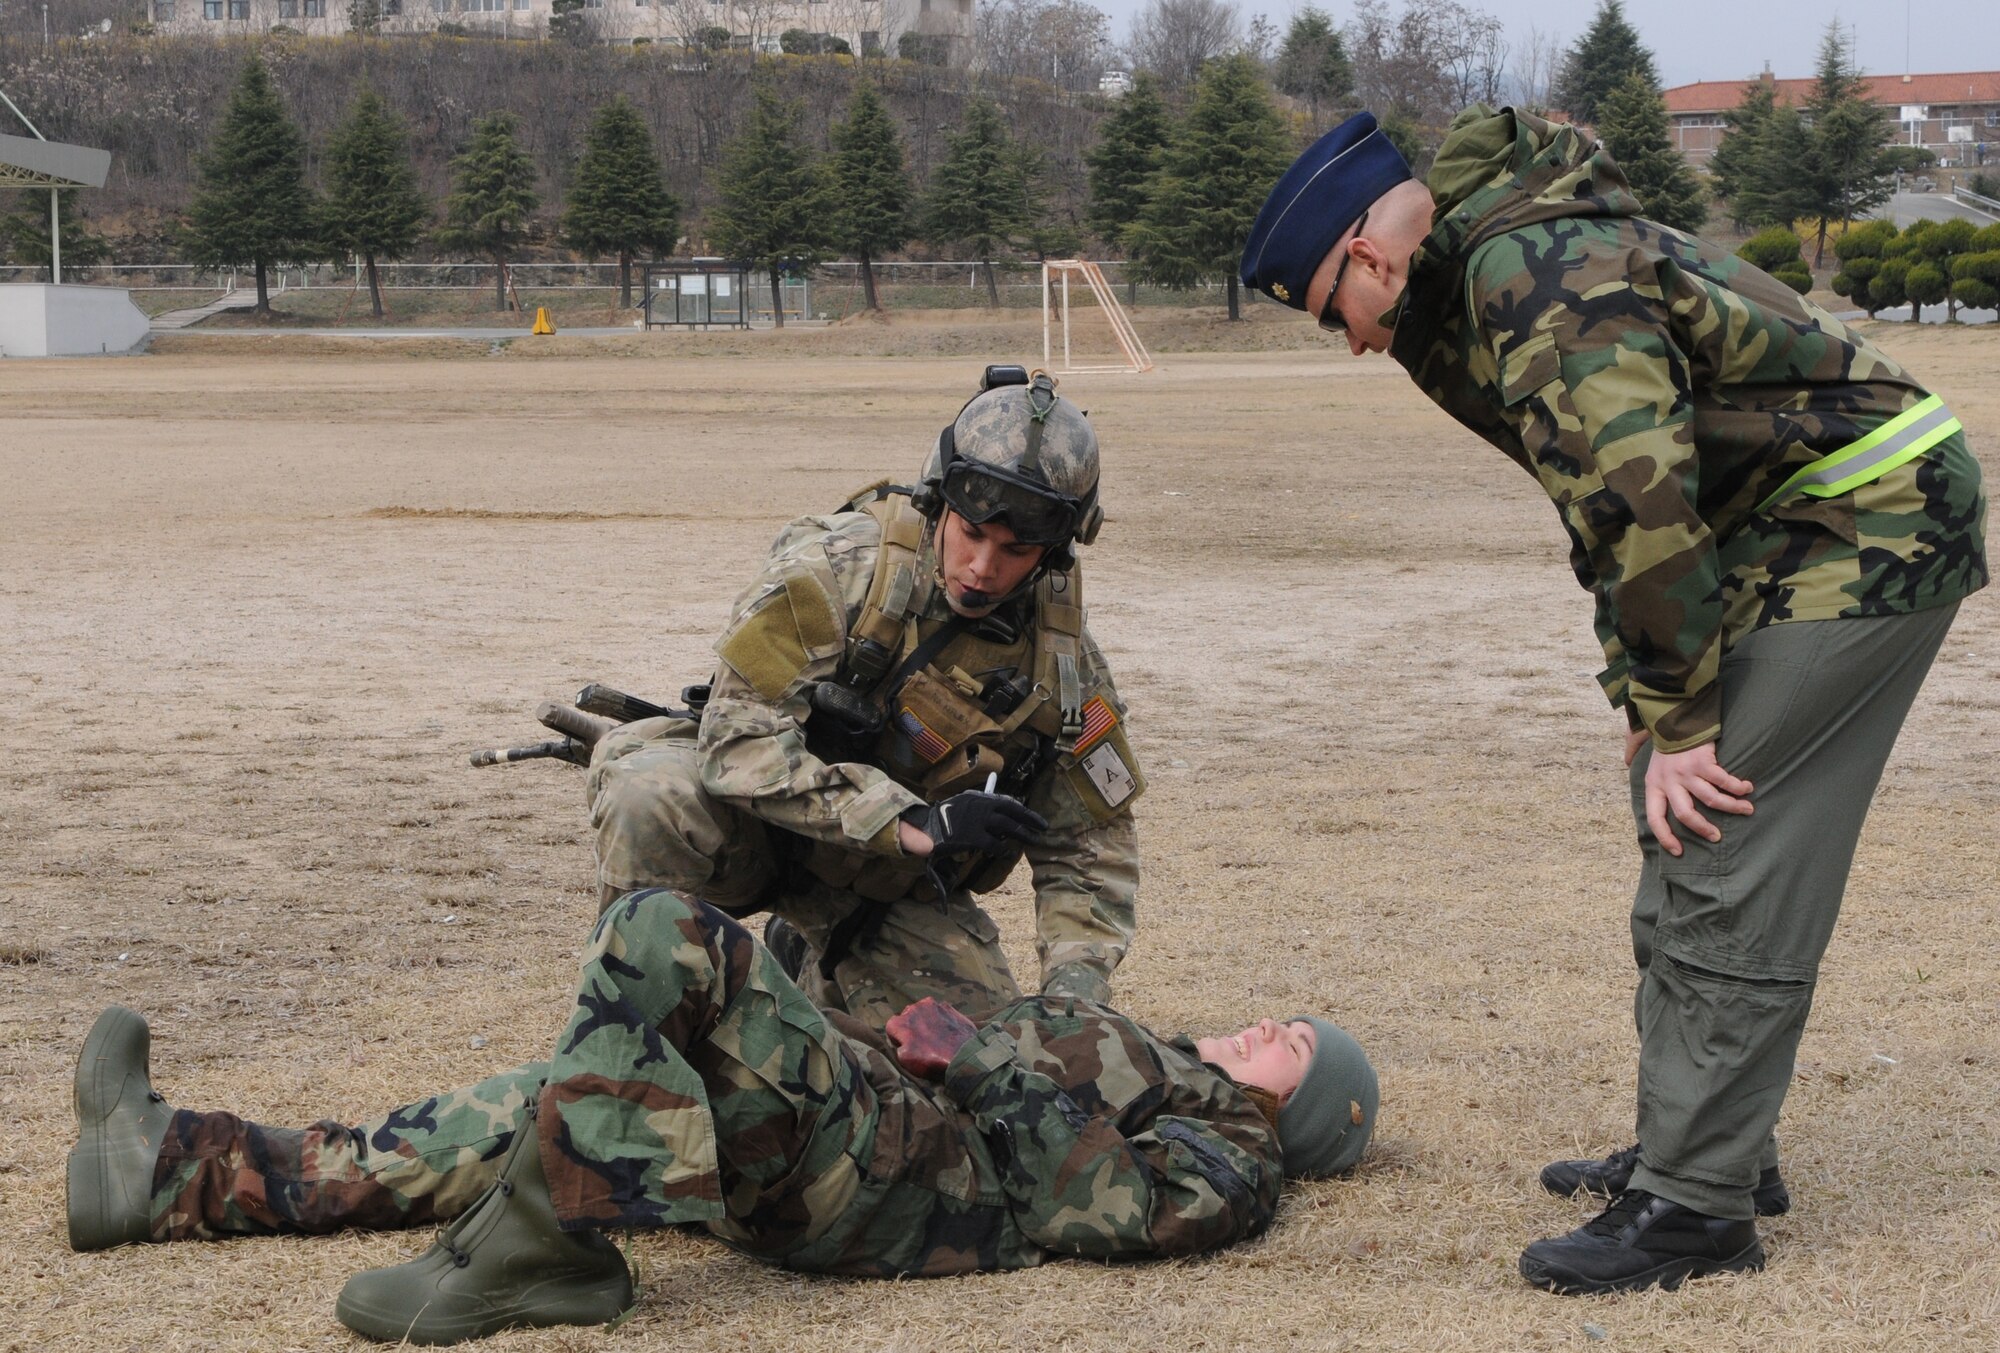 DAEGU AIR BASE, Republic of Korea -- Staff Sgt. Ryan Hatfield, a pararescueman from the 320th Special Tactics Squadron, asks Maj. John Hatfield, a flight surgeon from the 353rd Operations Support Squadron, for the vital signs on a simulated wounded soldier during a mass casualty exercise here March 27. The scenario is part of the 353rd Special Operations Group’s annual operational readiness exercise. (U.S. Air Force photo by Tech. Sgt. Aaron Cram)